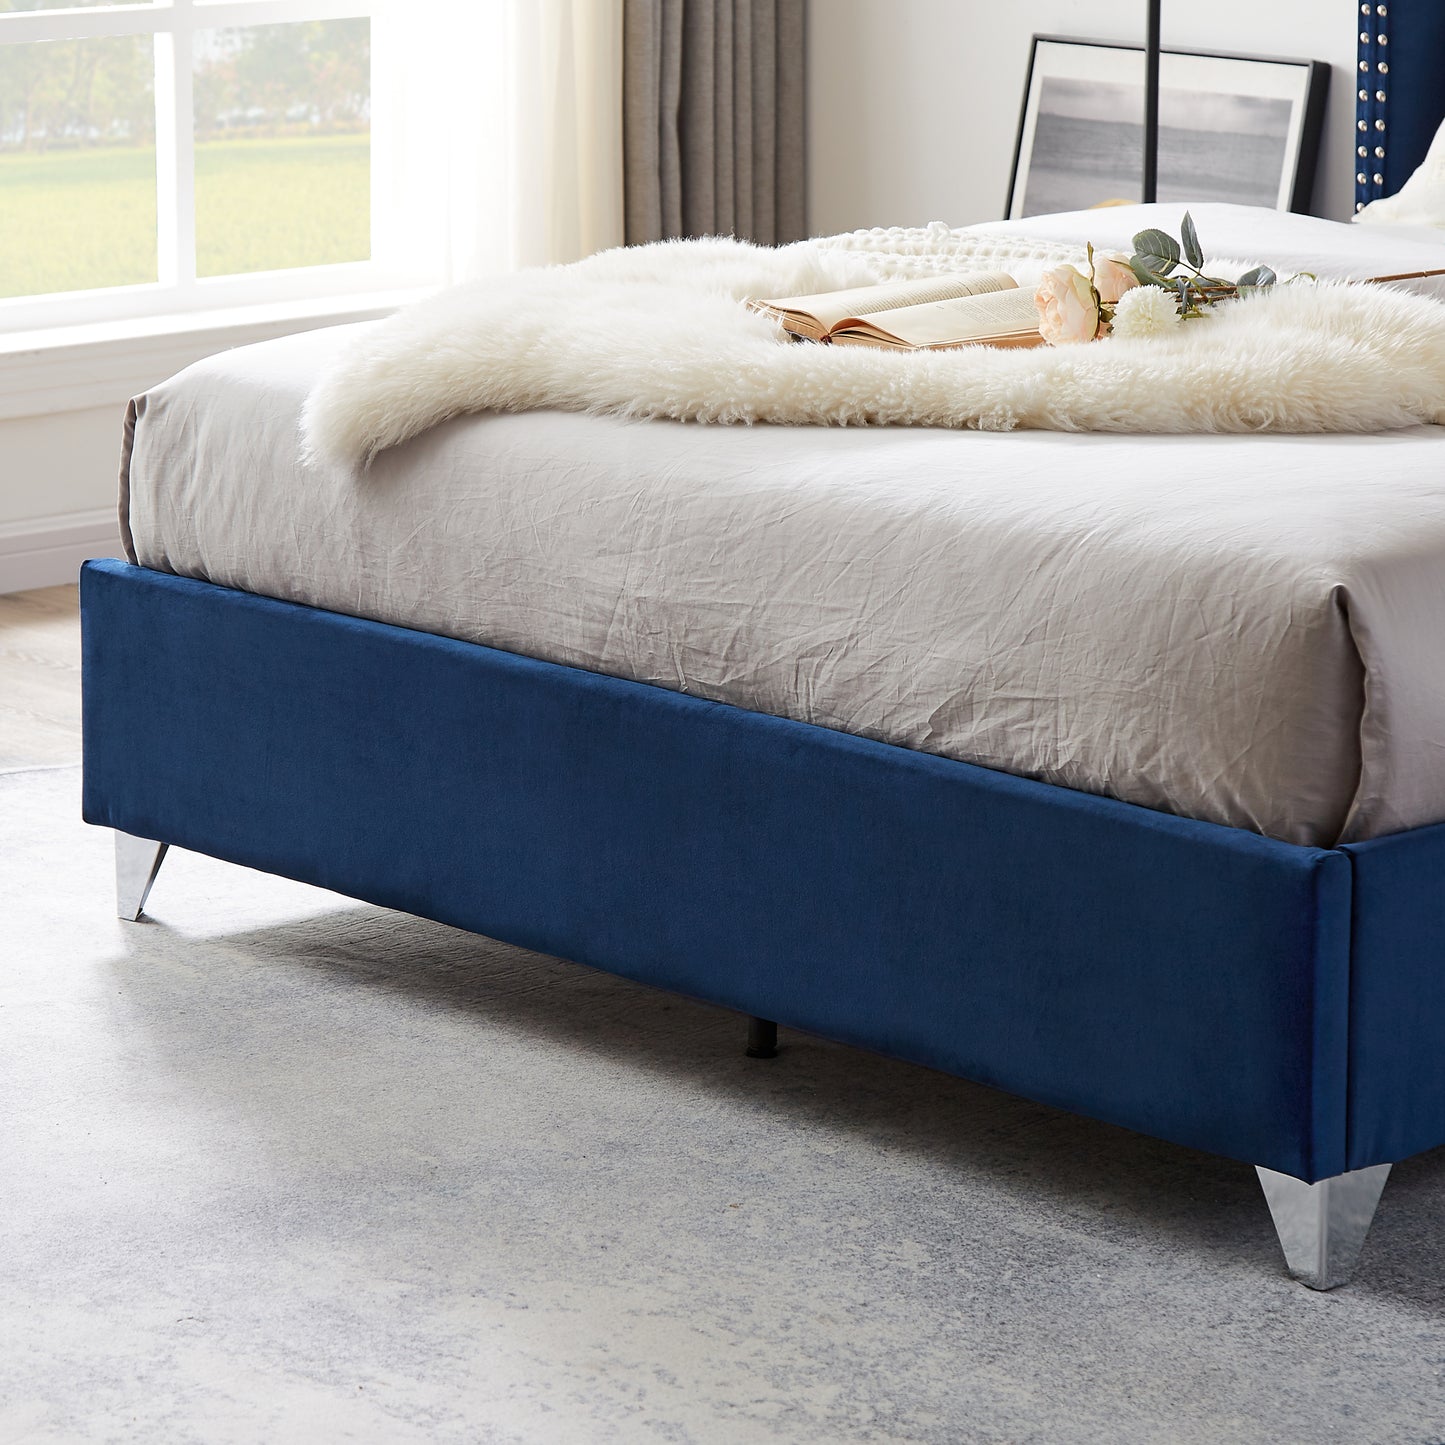 Caine King Bed (blue)